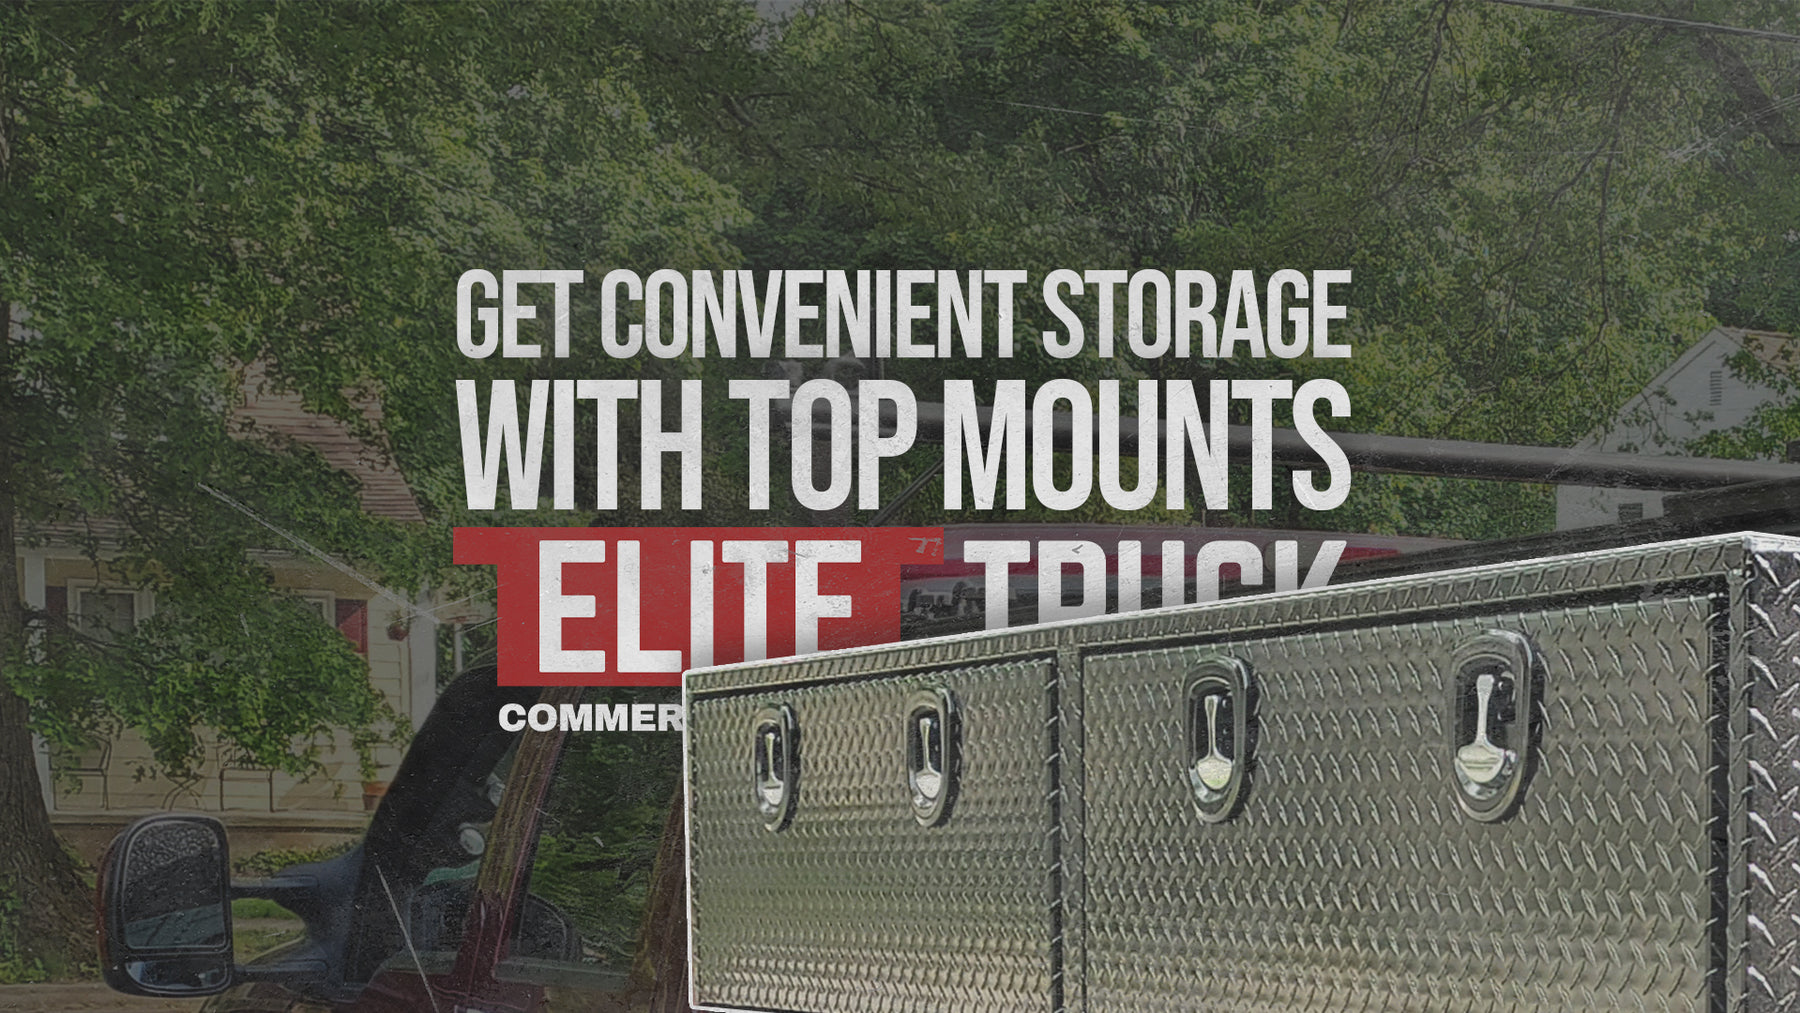 Top Mount Truck Tool Boxes: Convenient Storage and Easy Access for Your Tools